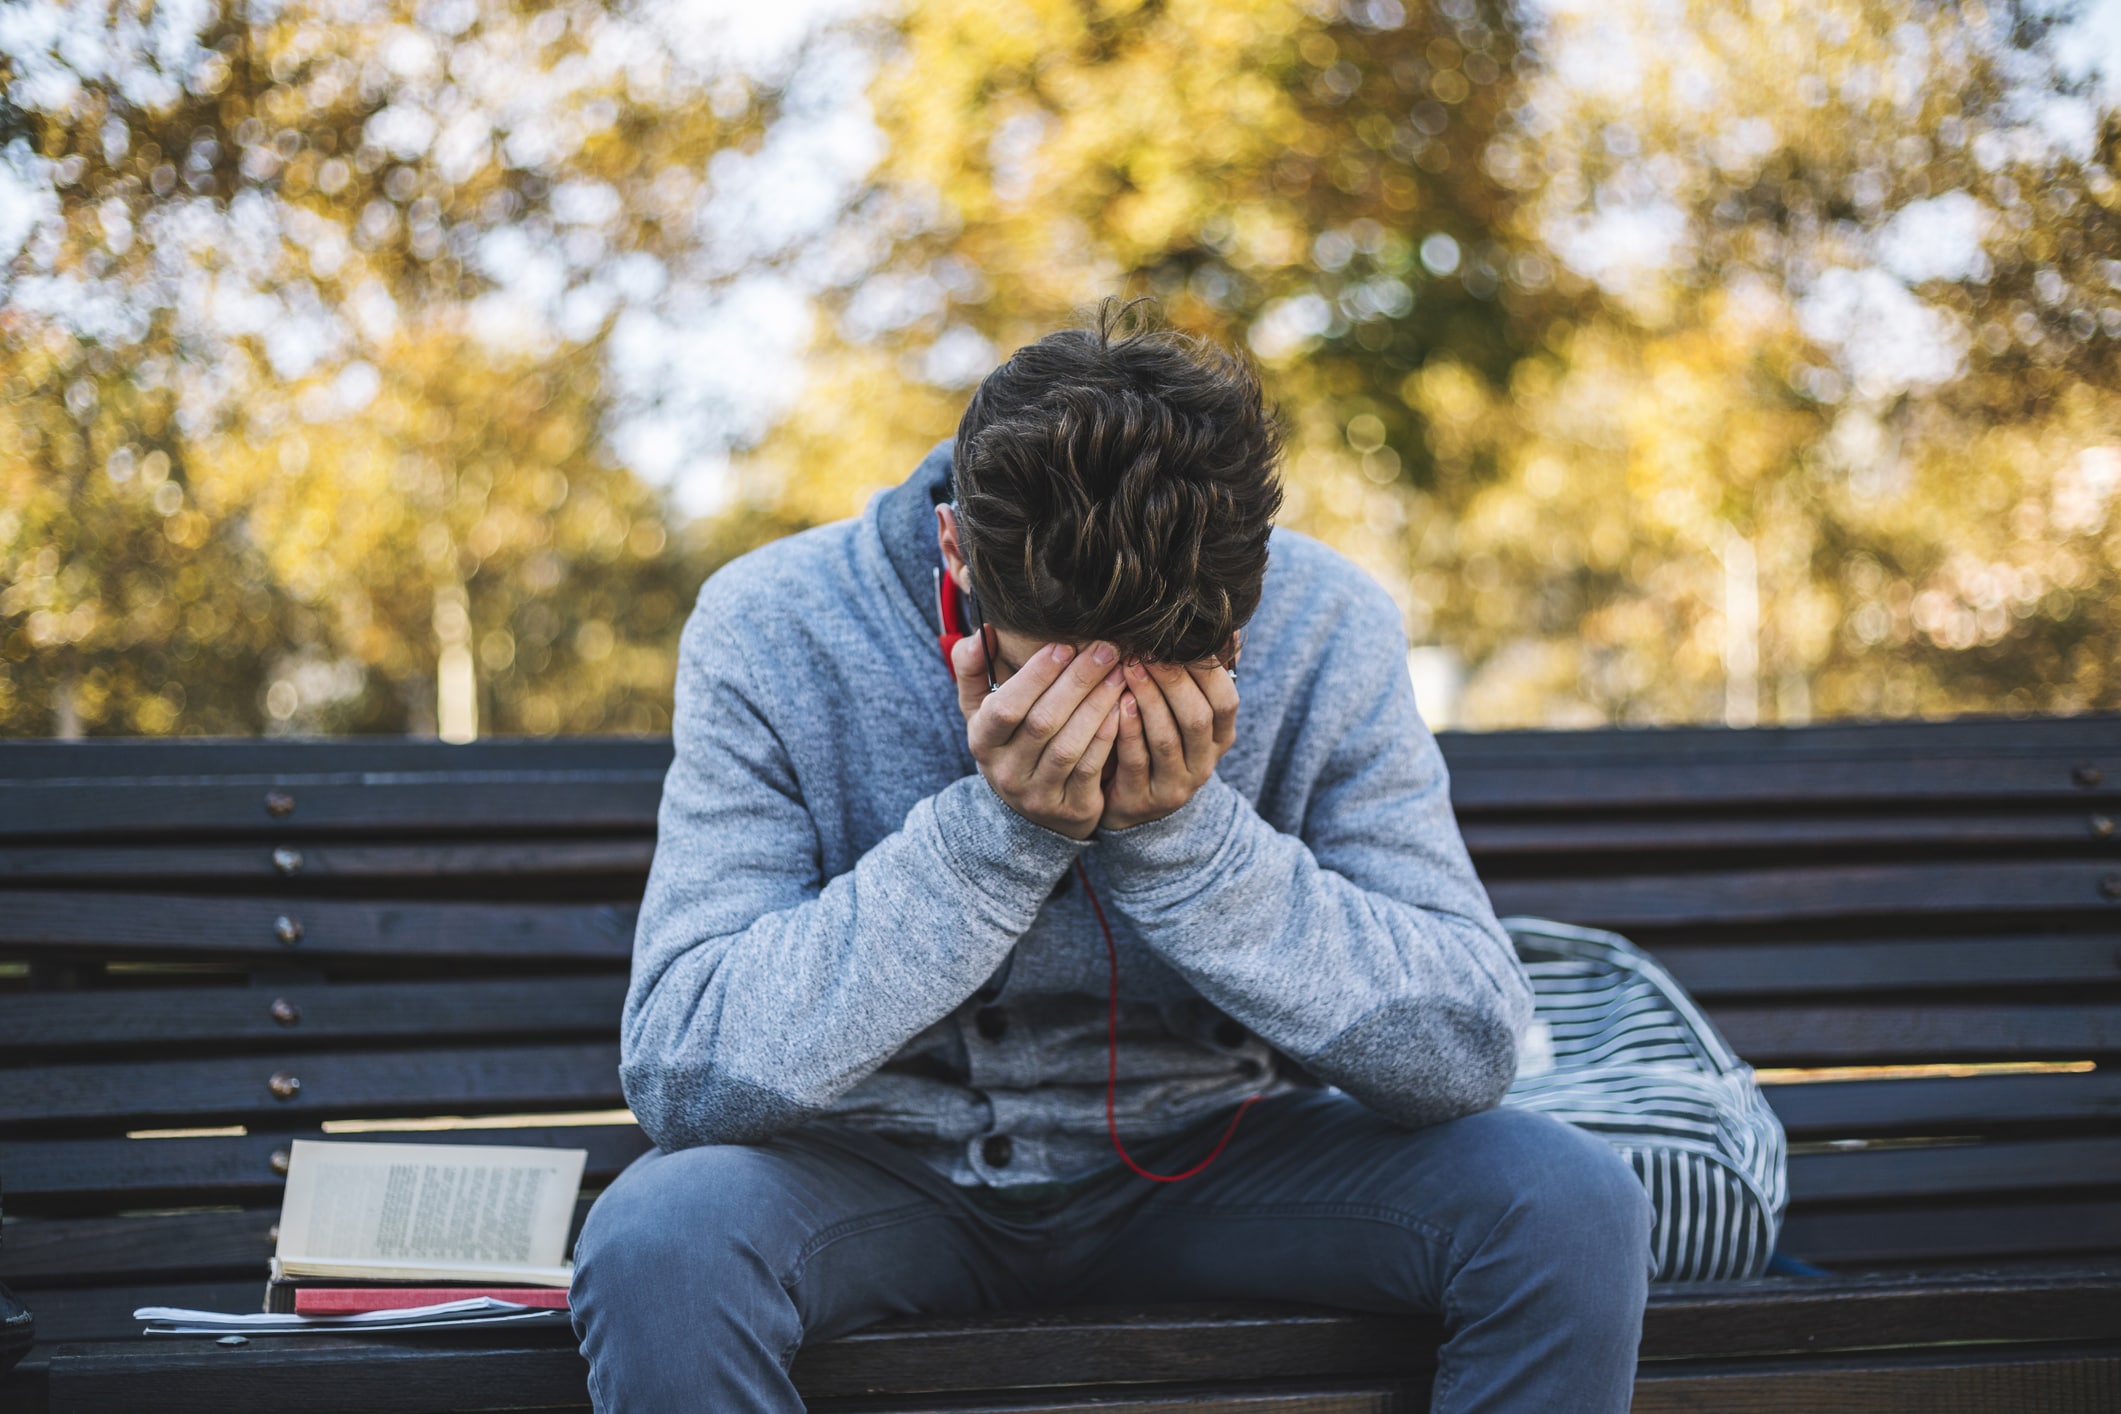 Male teen is suffering from anxiety and this could lead to self-harm.